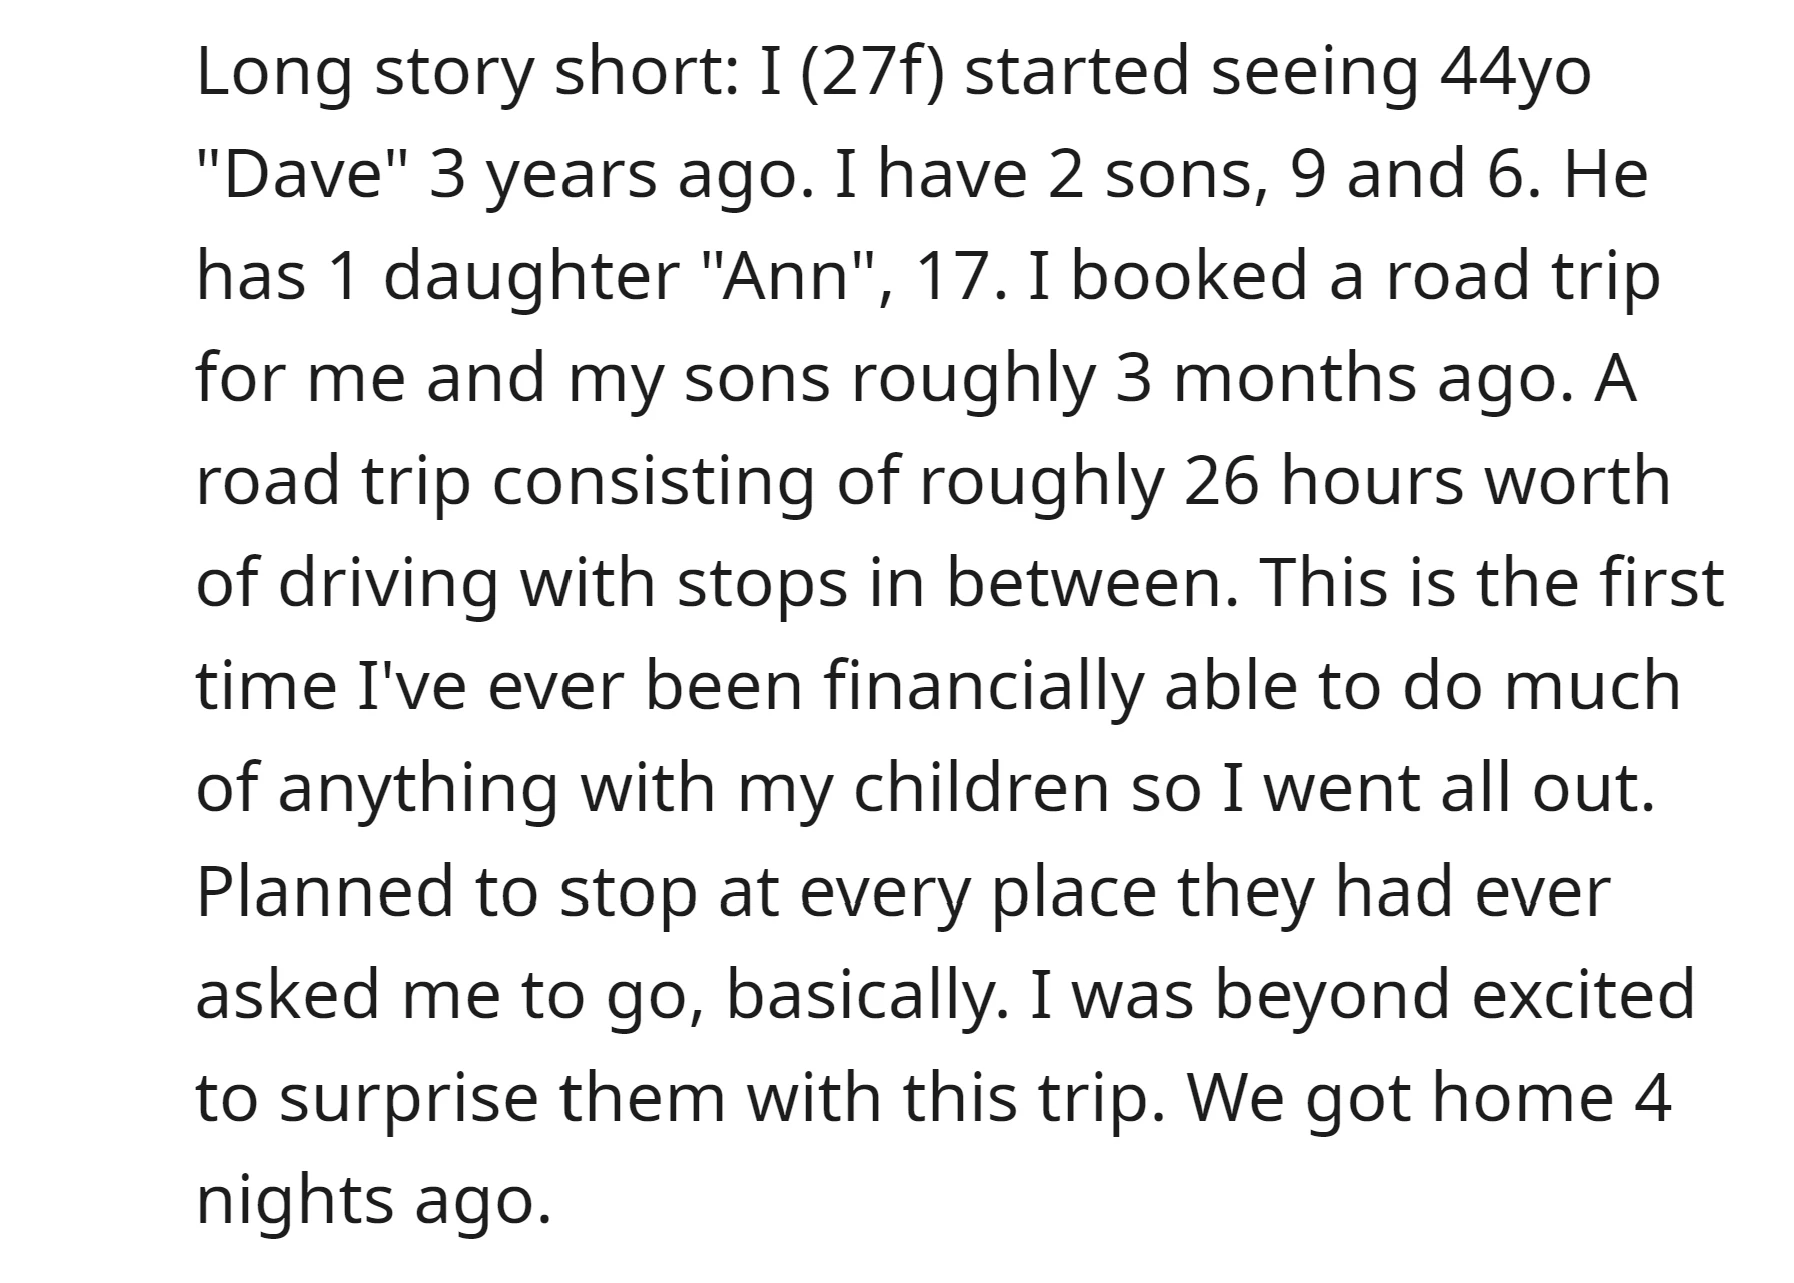 It Was A Wonderful Road Trip Since It's Also Their First